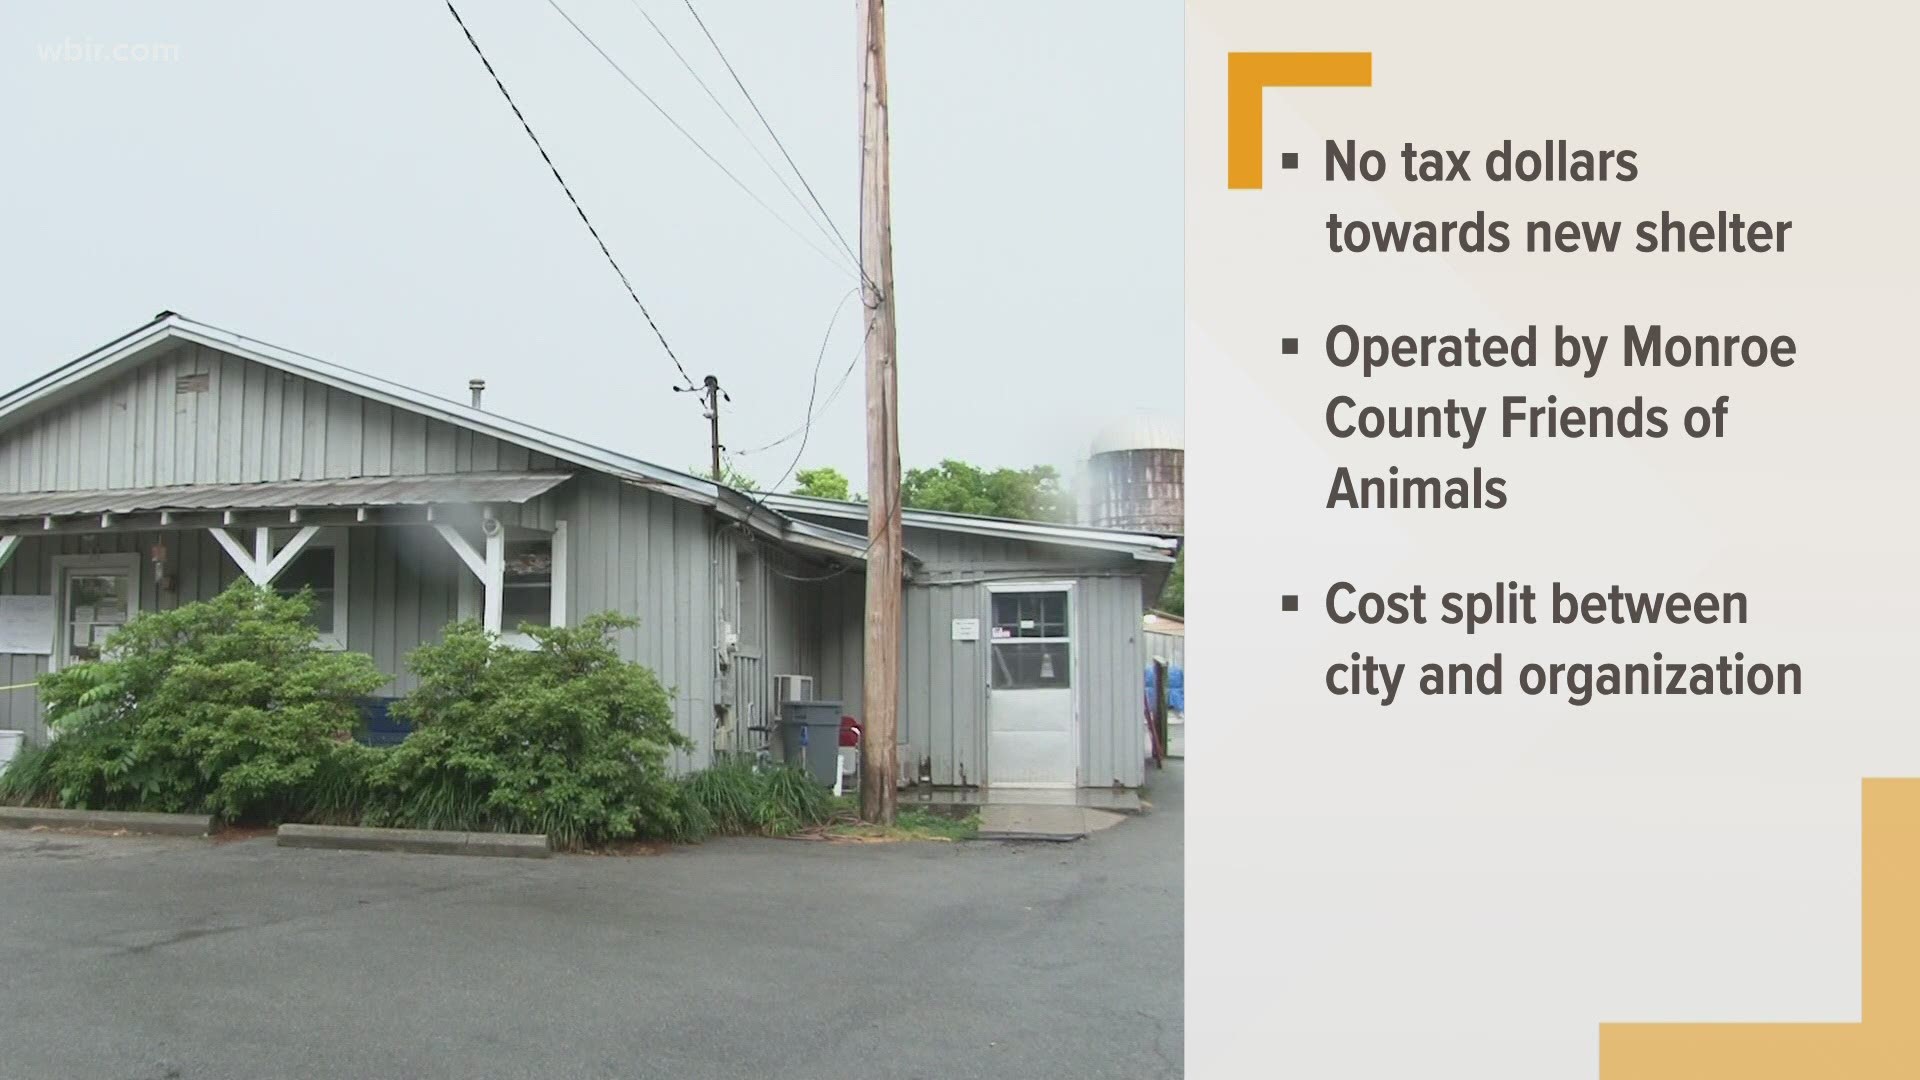 Under the new agreement, no tax dollars would go towards the new shelter.